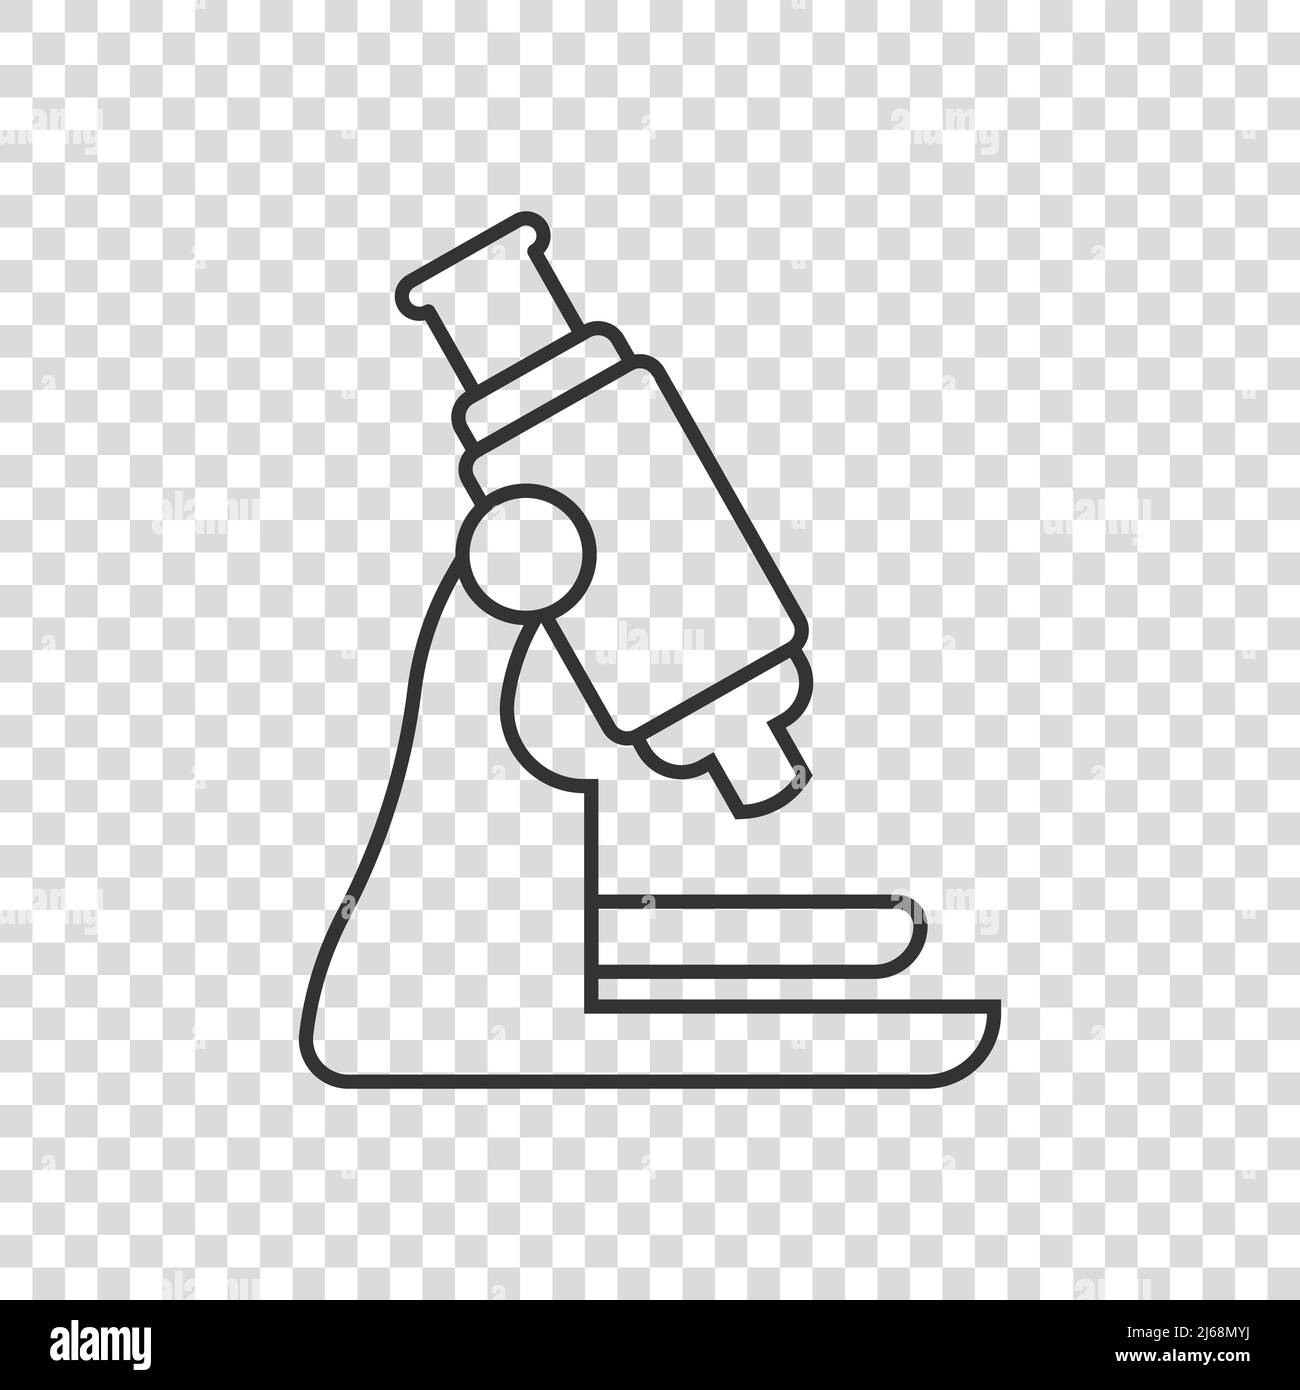 Microscope icon in flat style. Laboratory magnifier vector illustration on isolated background. Biology instrument sign business concept. Stock Vector